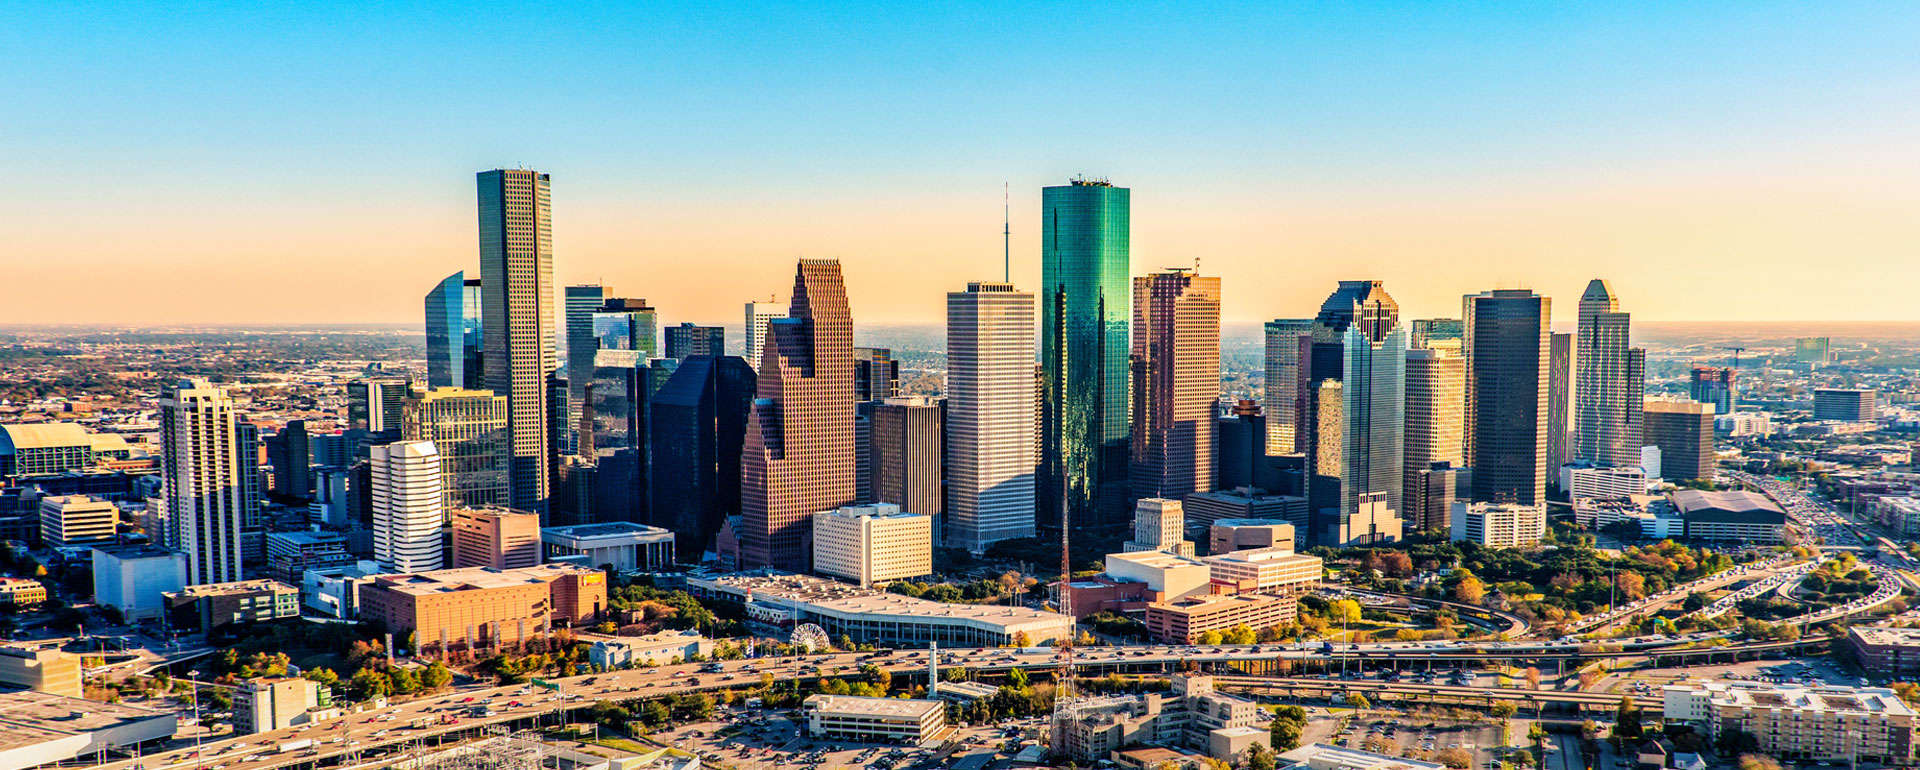 Harris County Texas Selects Tradition Energy to Lead Risk Management and Renewable Services